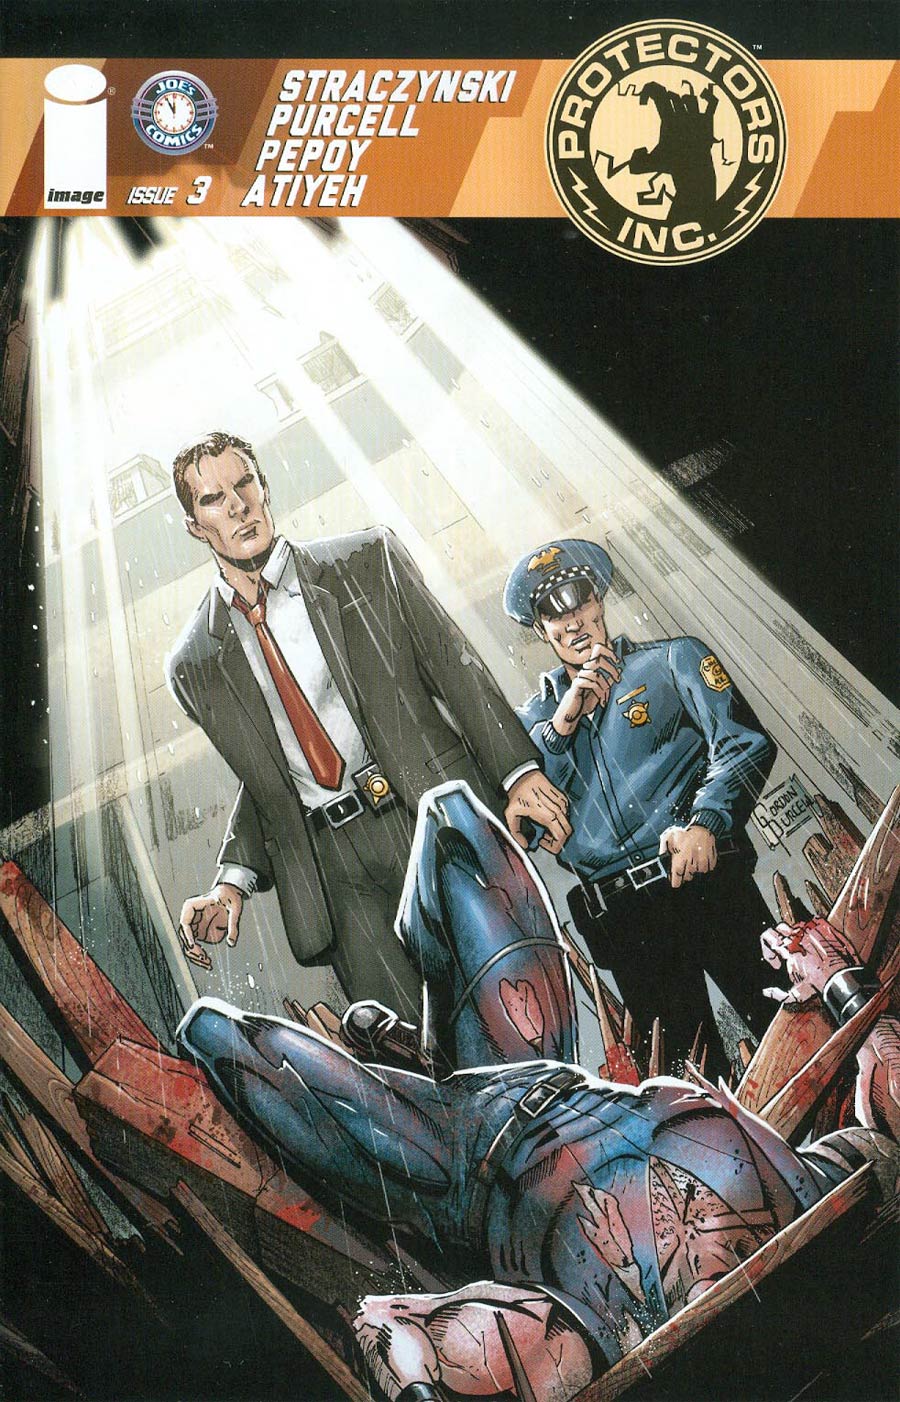 Protectors Inc #3 Cover A Gordon Purcell & Mike Atiyeh